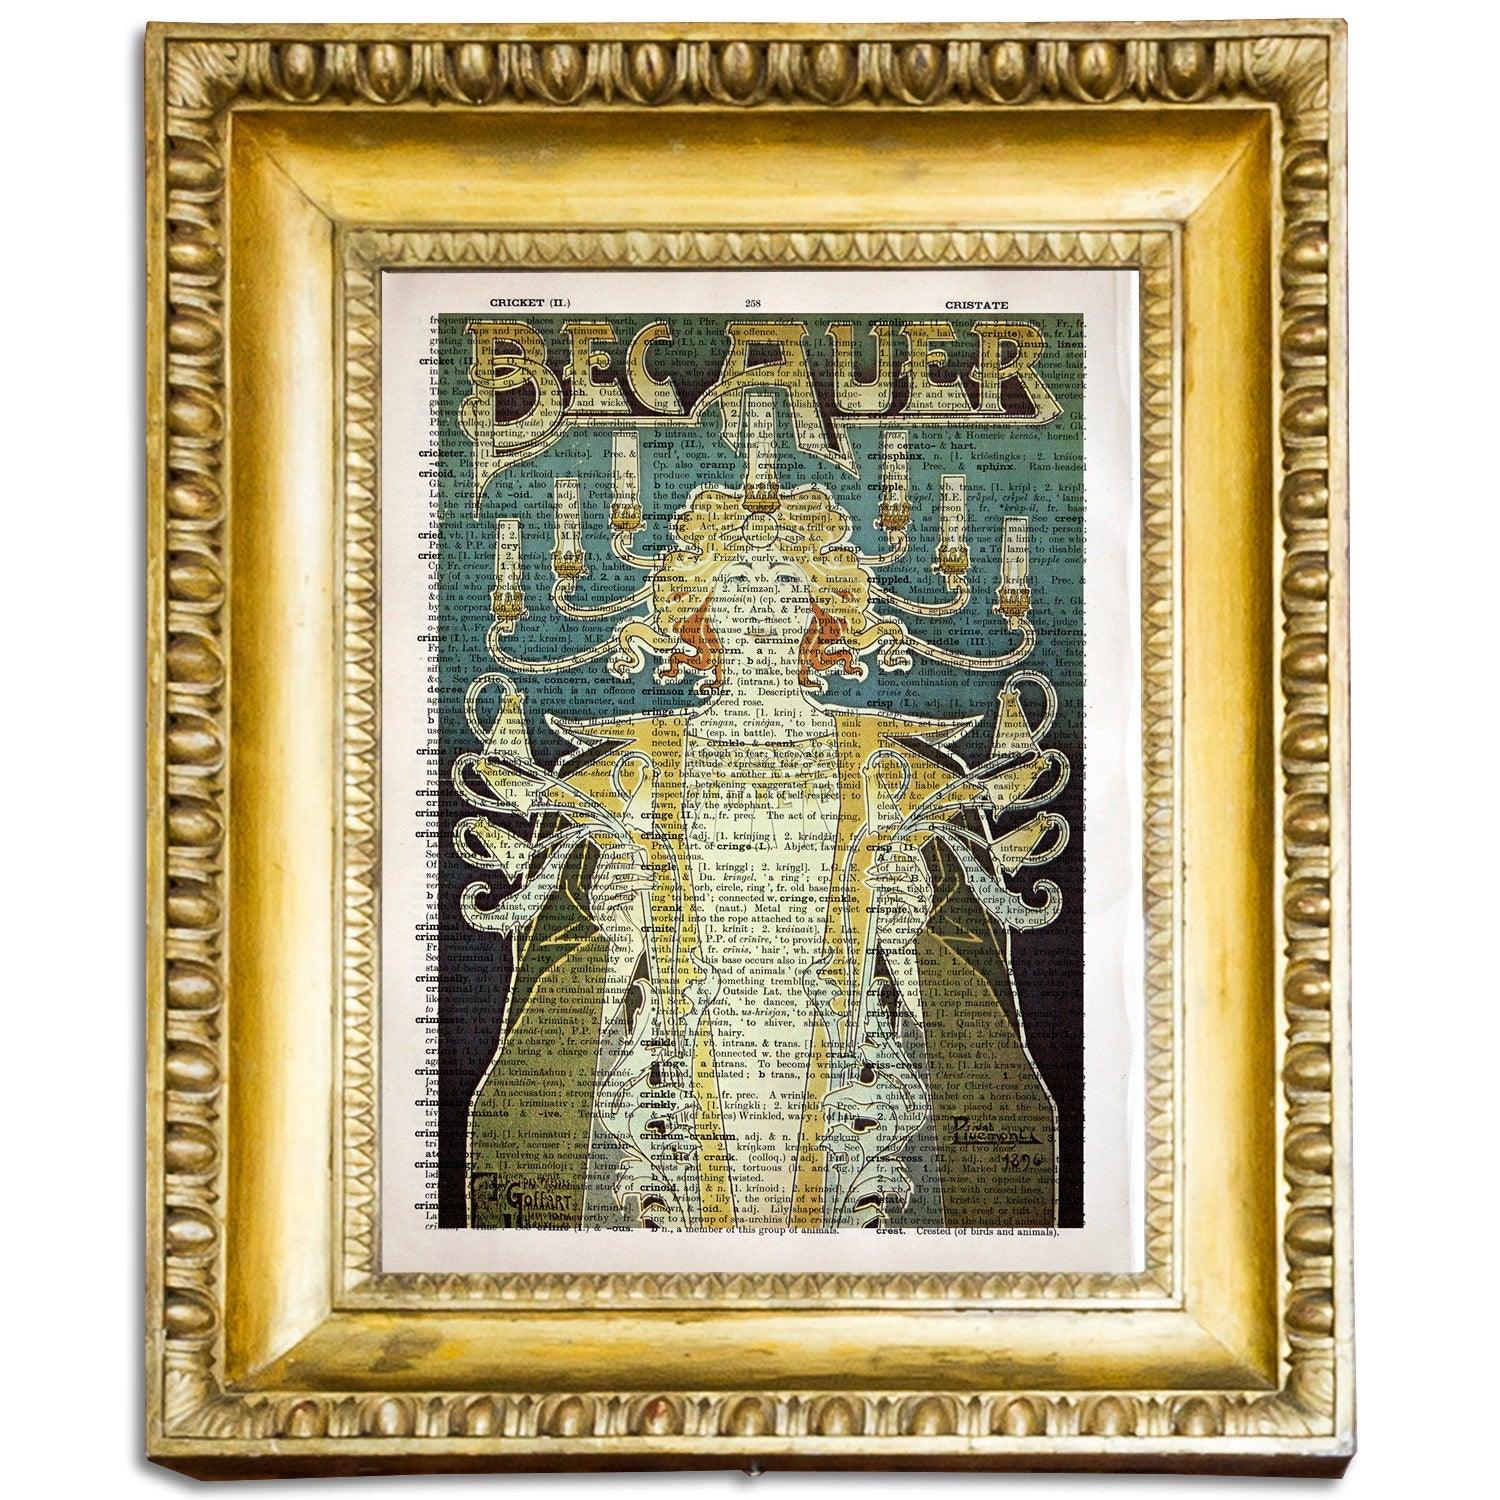 Give your home decor a touch of elegance through our exquisite Bec Auer reproduction poster. The artwork is a collage with the advertising poster for incandescent gas illumination design by Privat Livemont (Belgian graphic designer, 1861-1936). Year of created 1896.